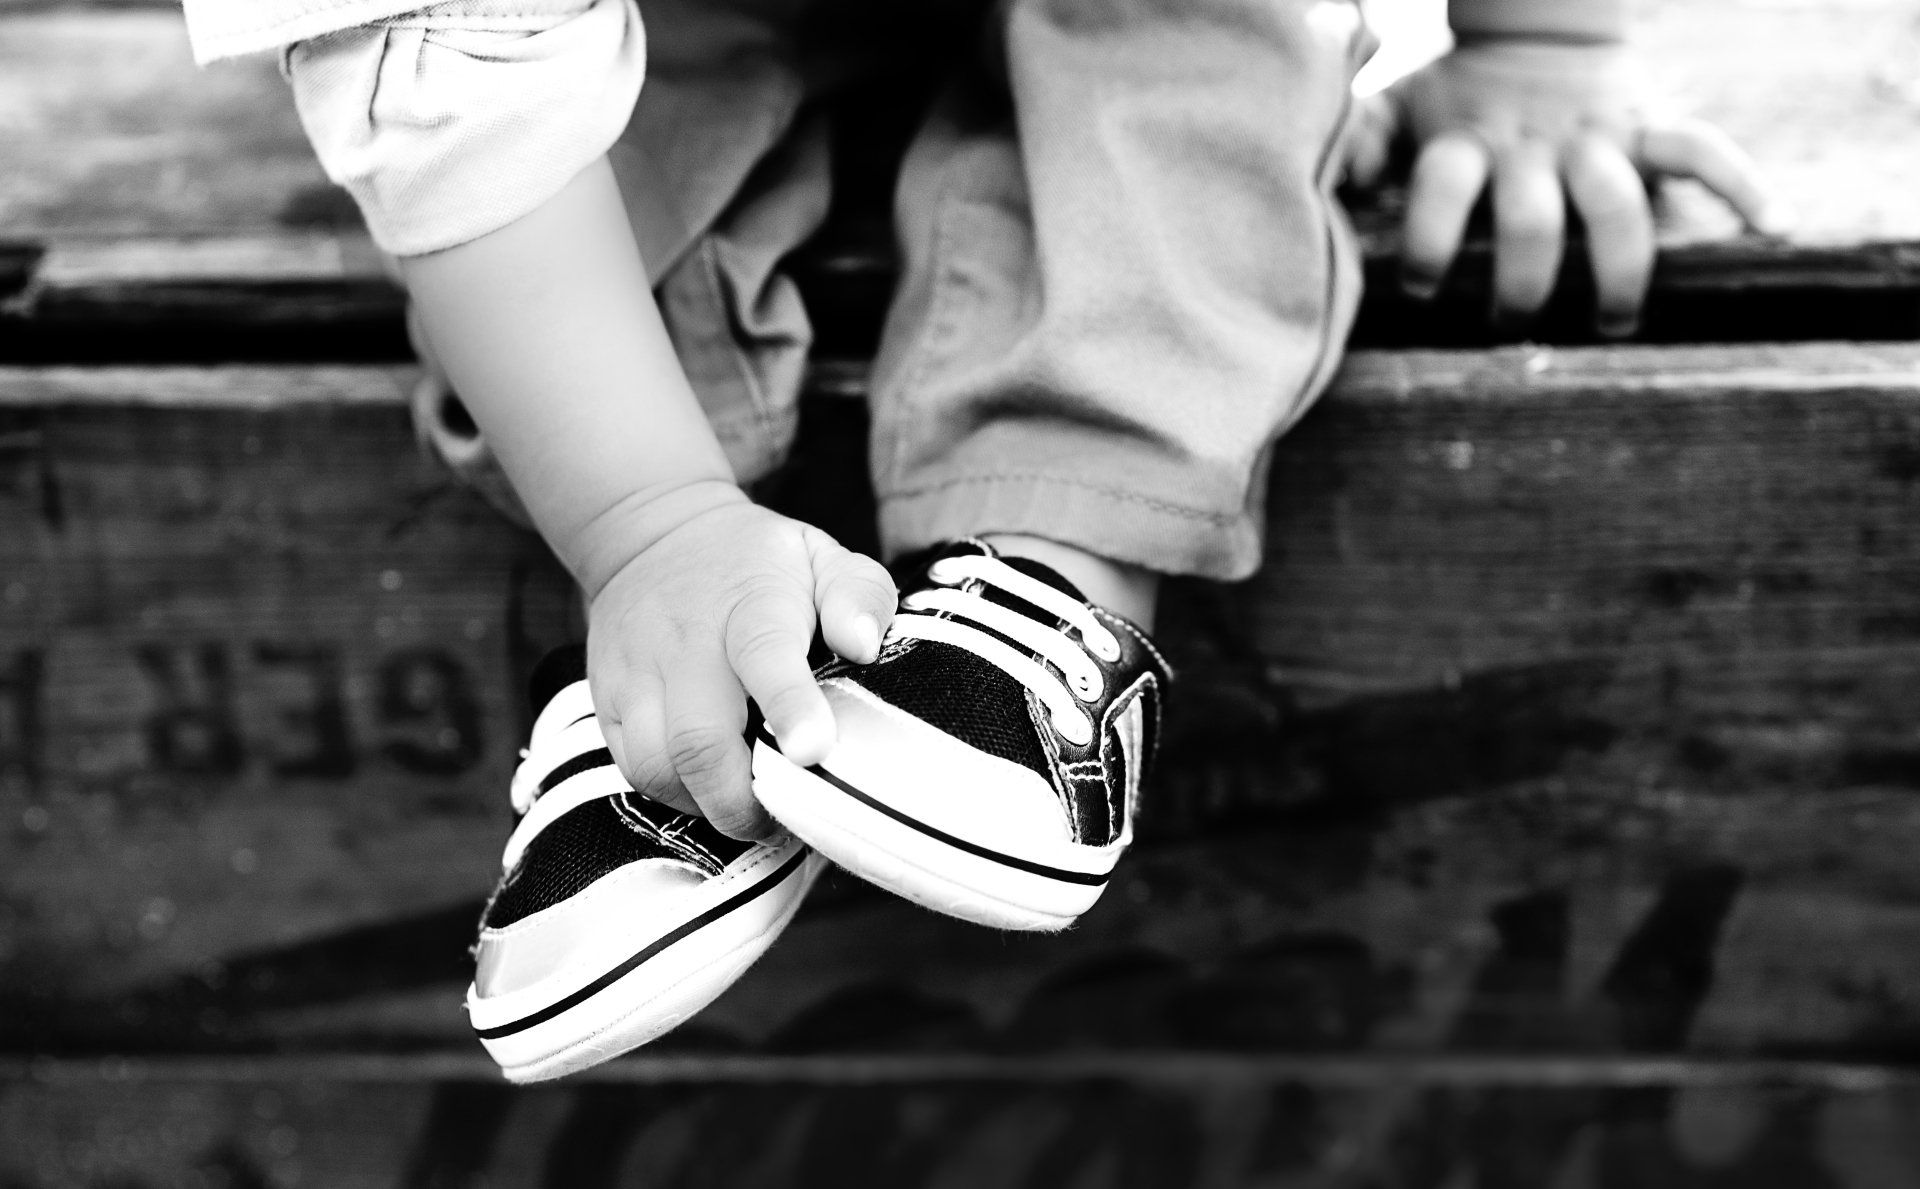 Family photographer Toronto | Stacey Naglie | Sneaker covered feet of a toddler